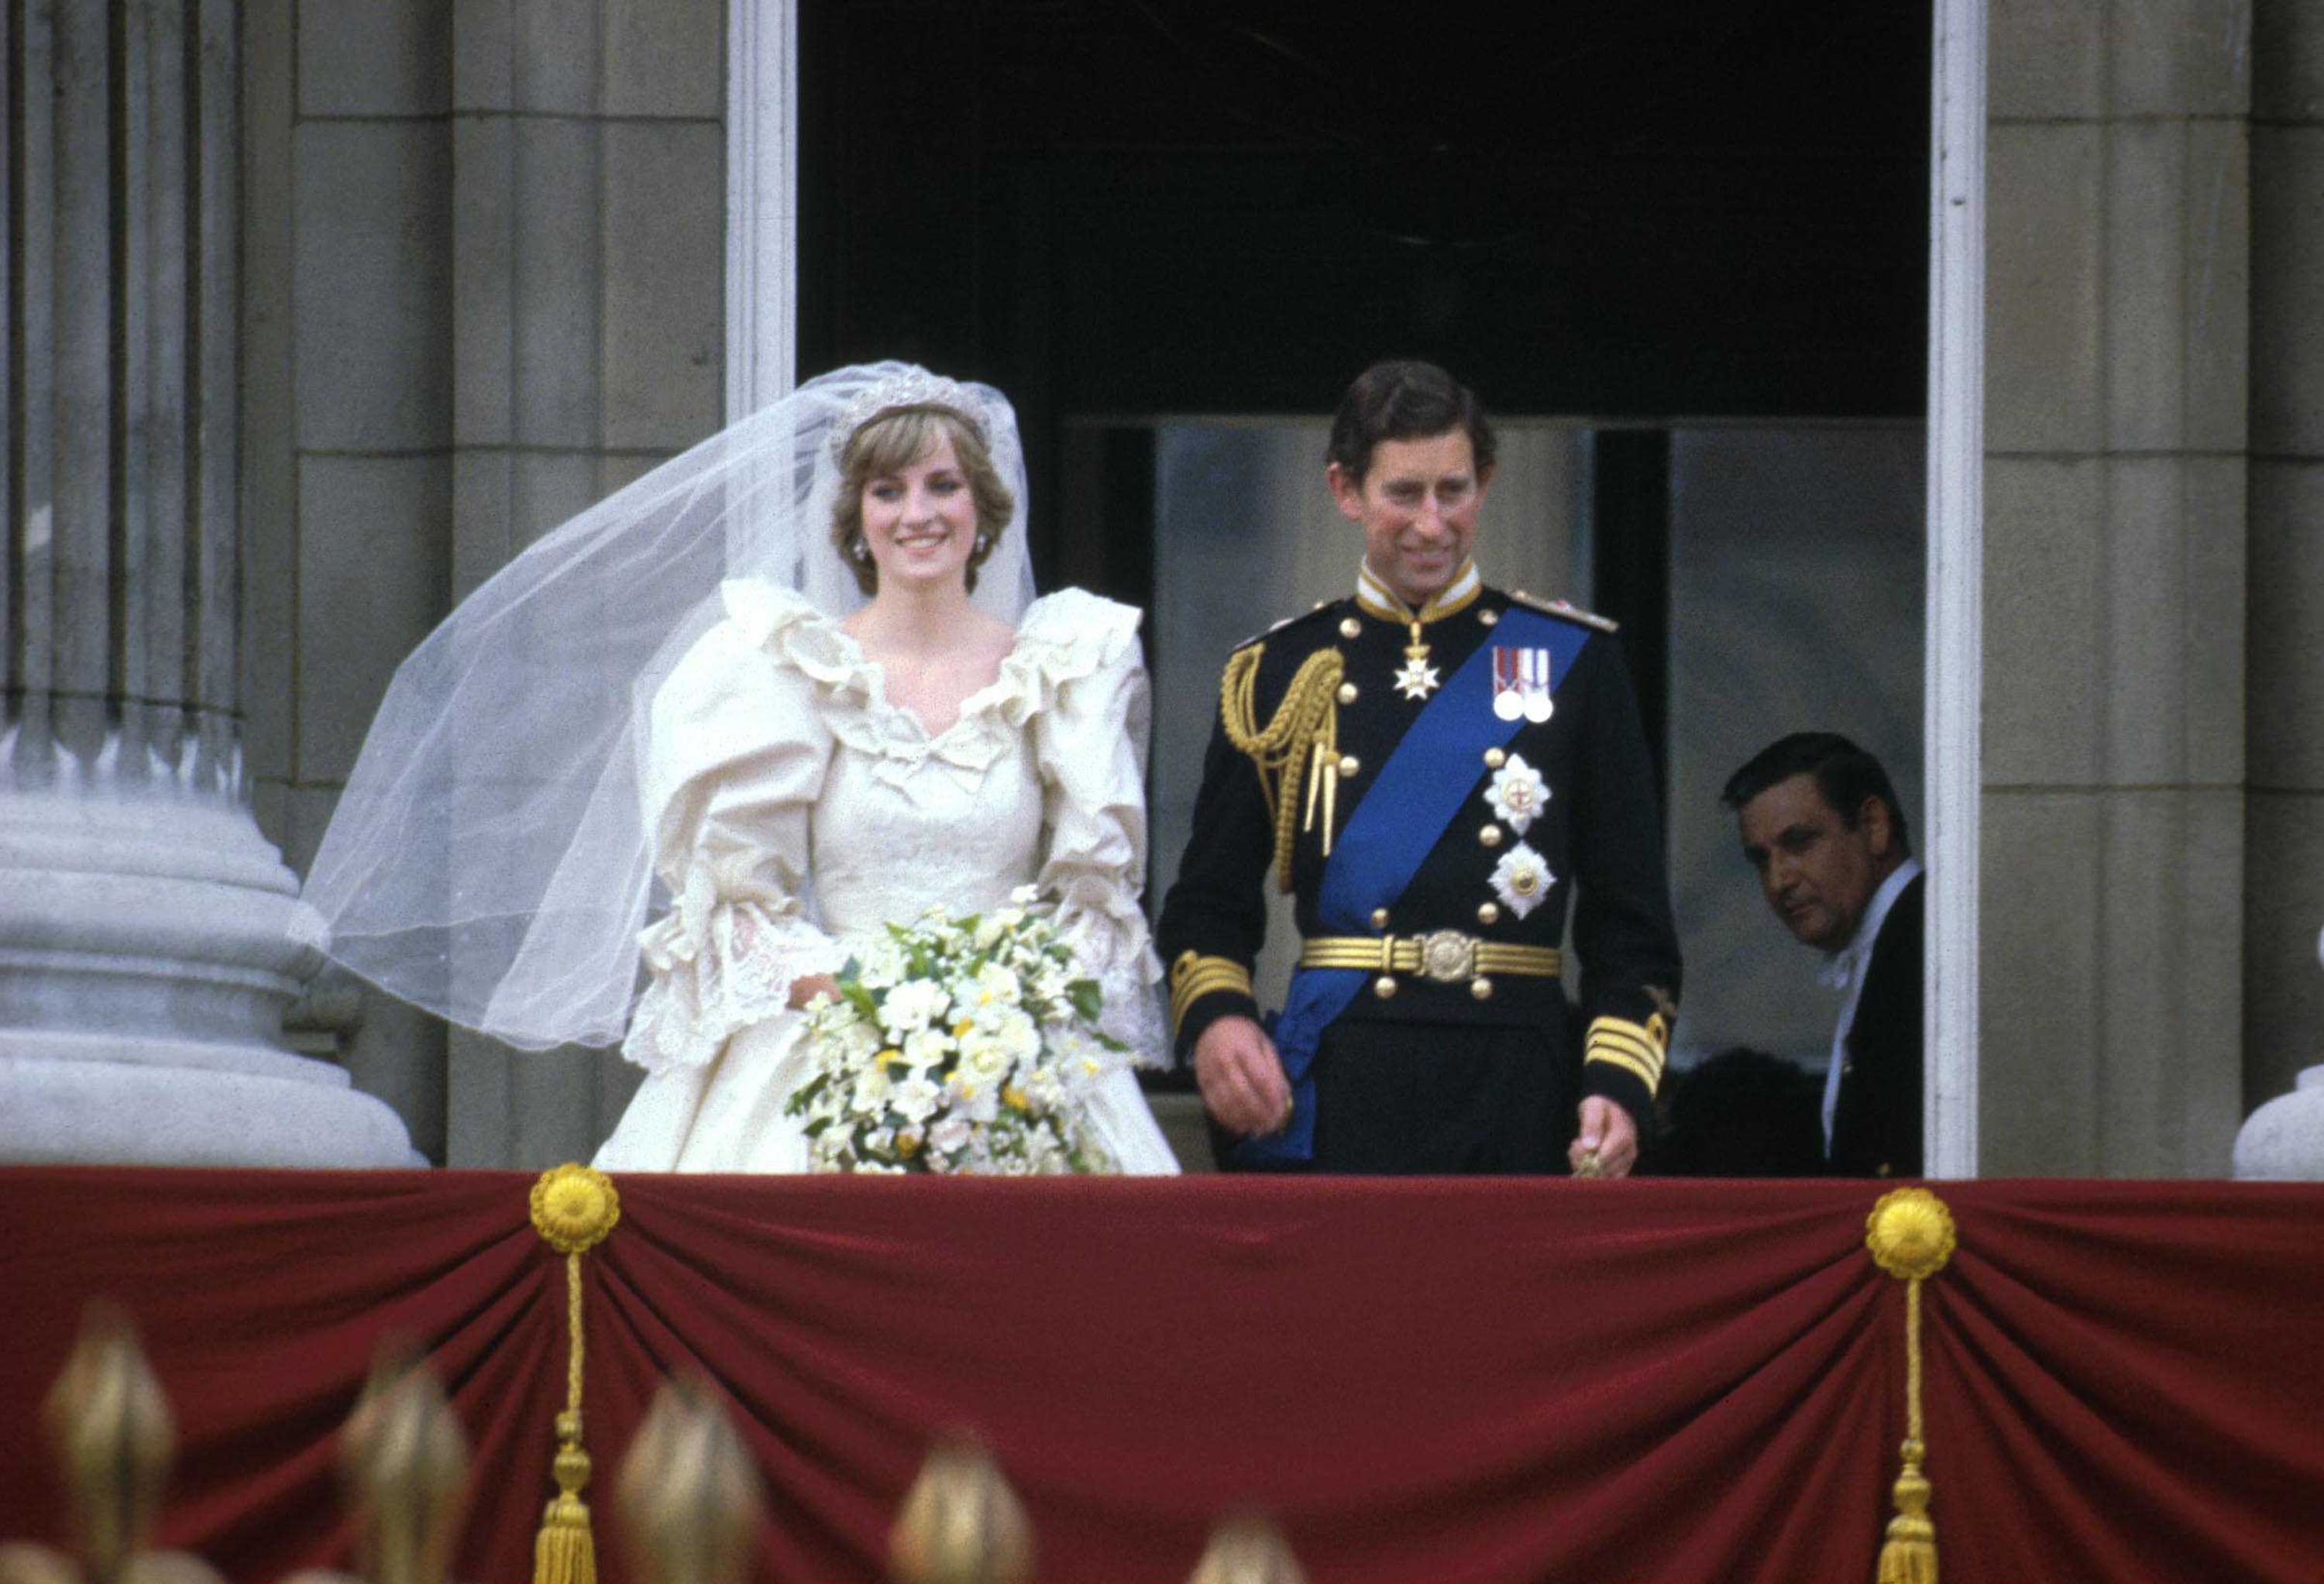 Prince Charles and Princess Diana at St. Paul's Cathedral in London, England, on July 29, 1981. | Source: Getty Images